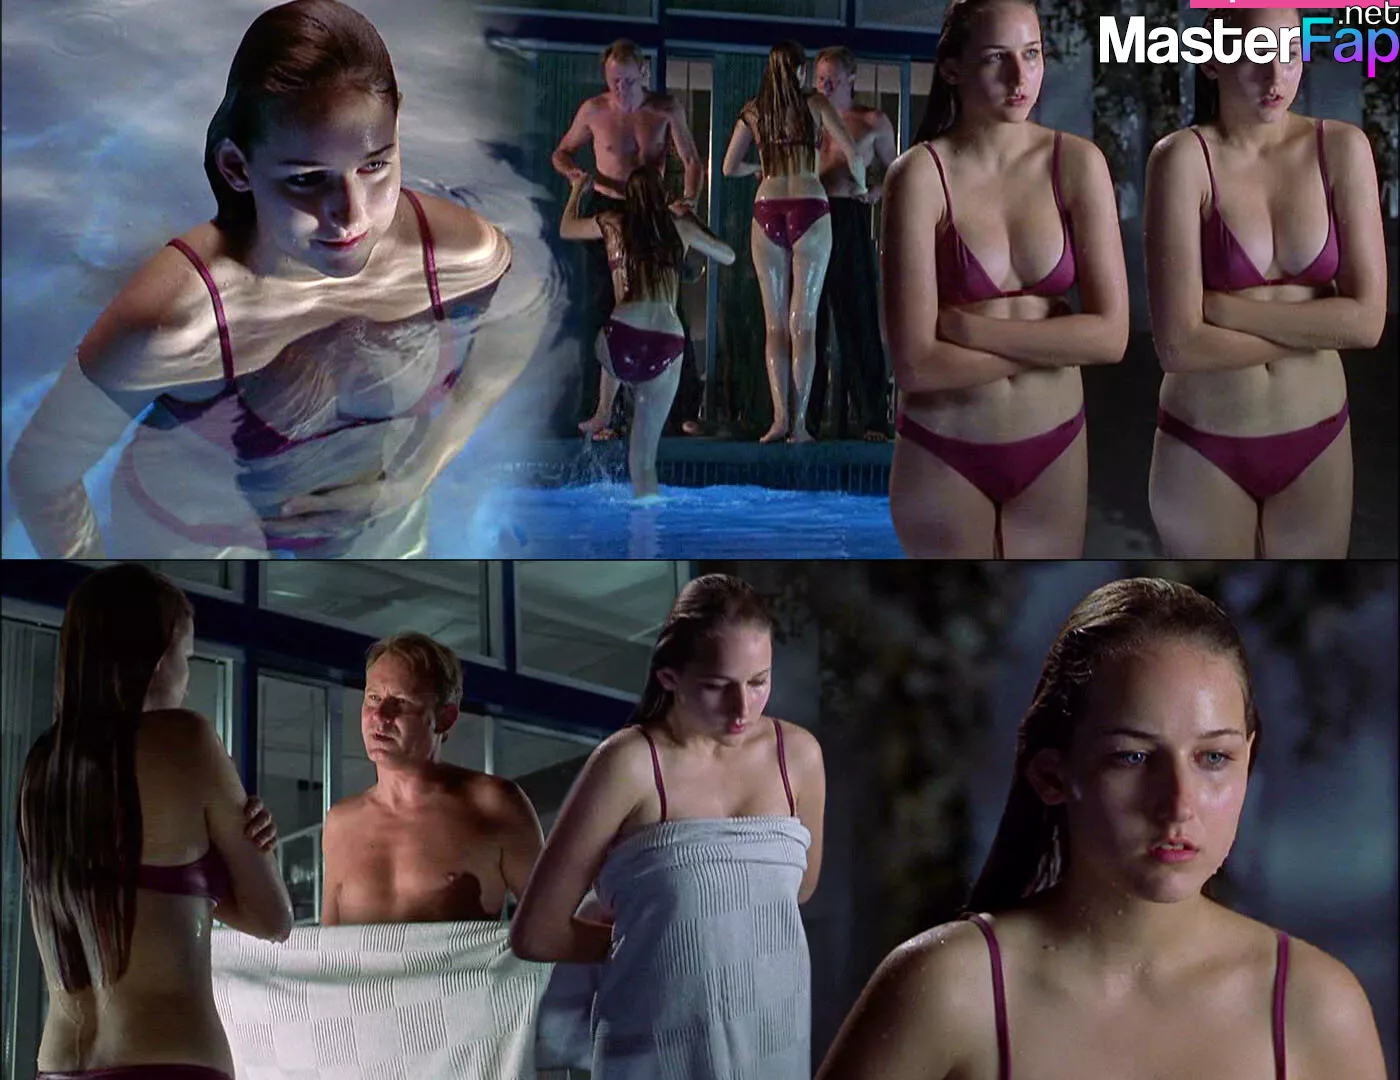 abeer yasser recommends leelee sobieski naked pictures pic